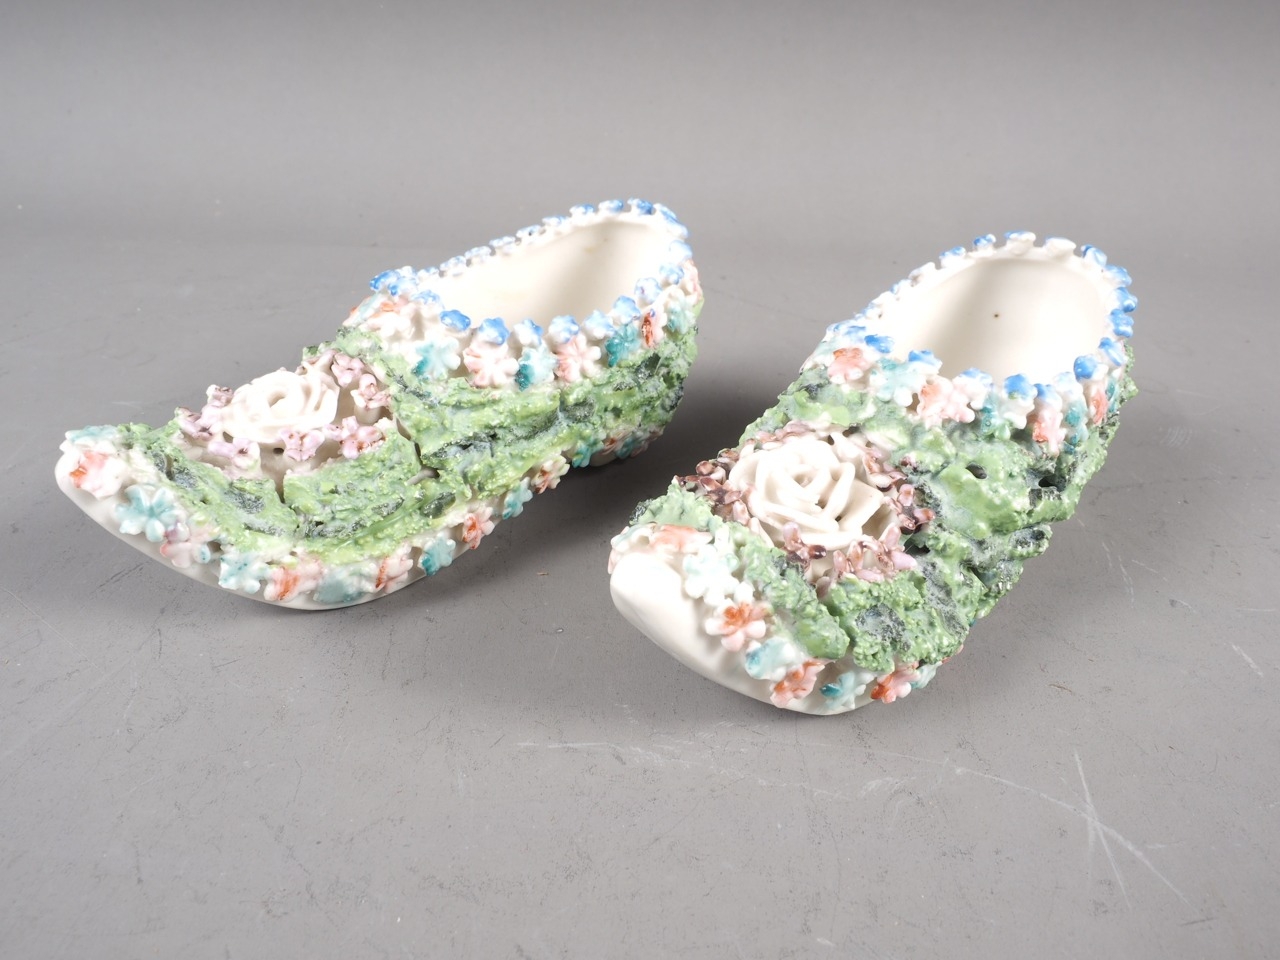 A pair of 19th century Continental porcelain "Moss Ware" clogs, 5" long